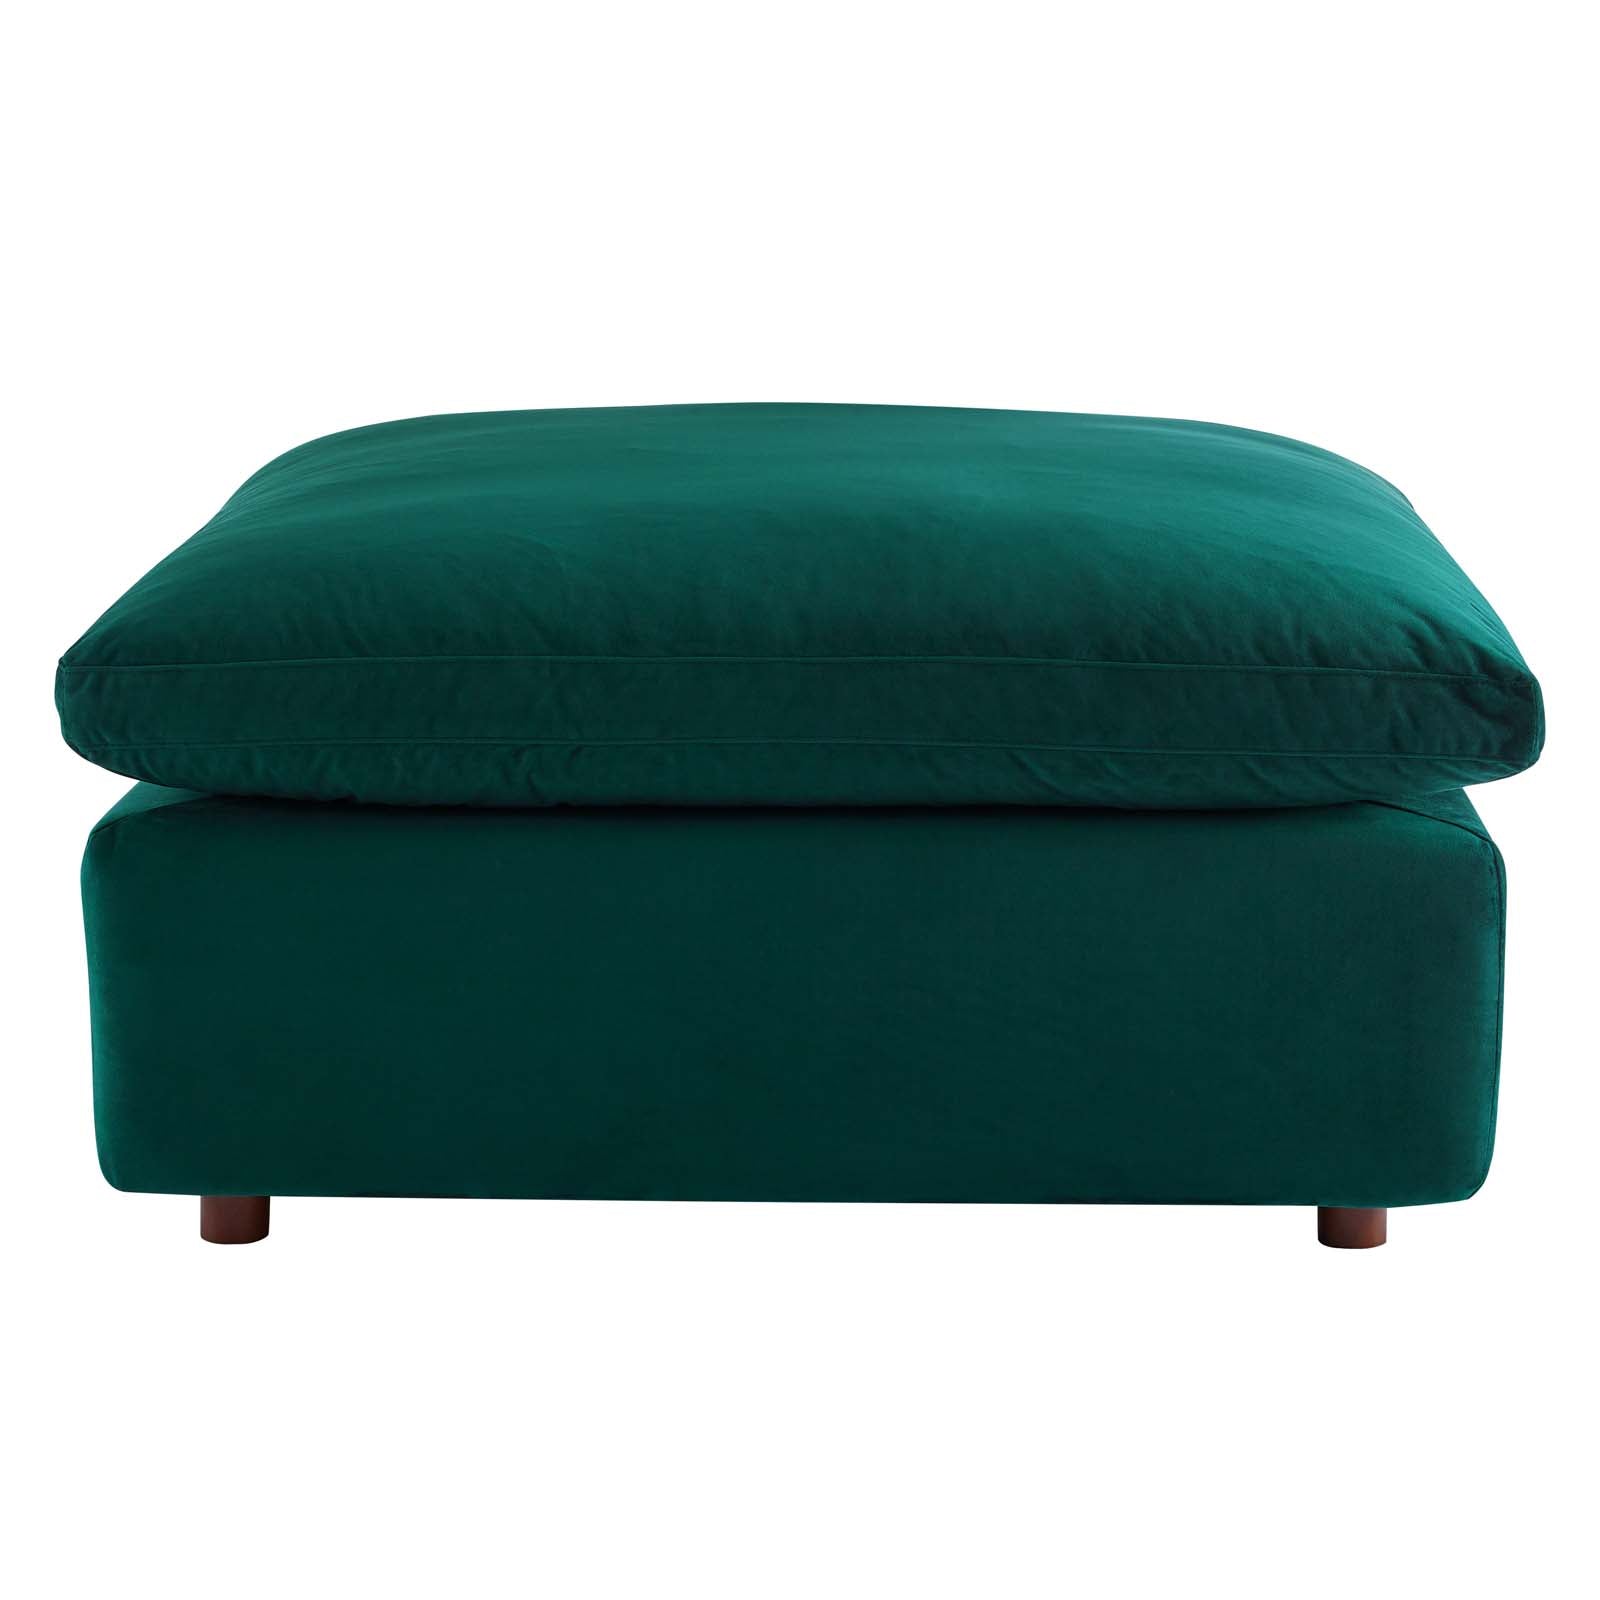 Modway Sectional Sofas - Commix Down Filled Overstuffed Performance Velvet 4 Piece Sectional Sofa Green